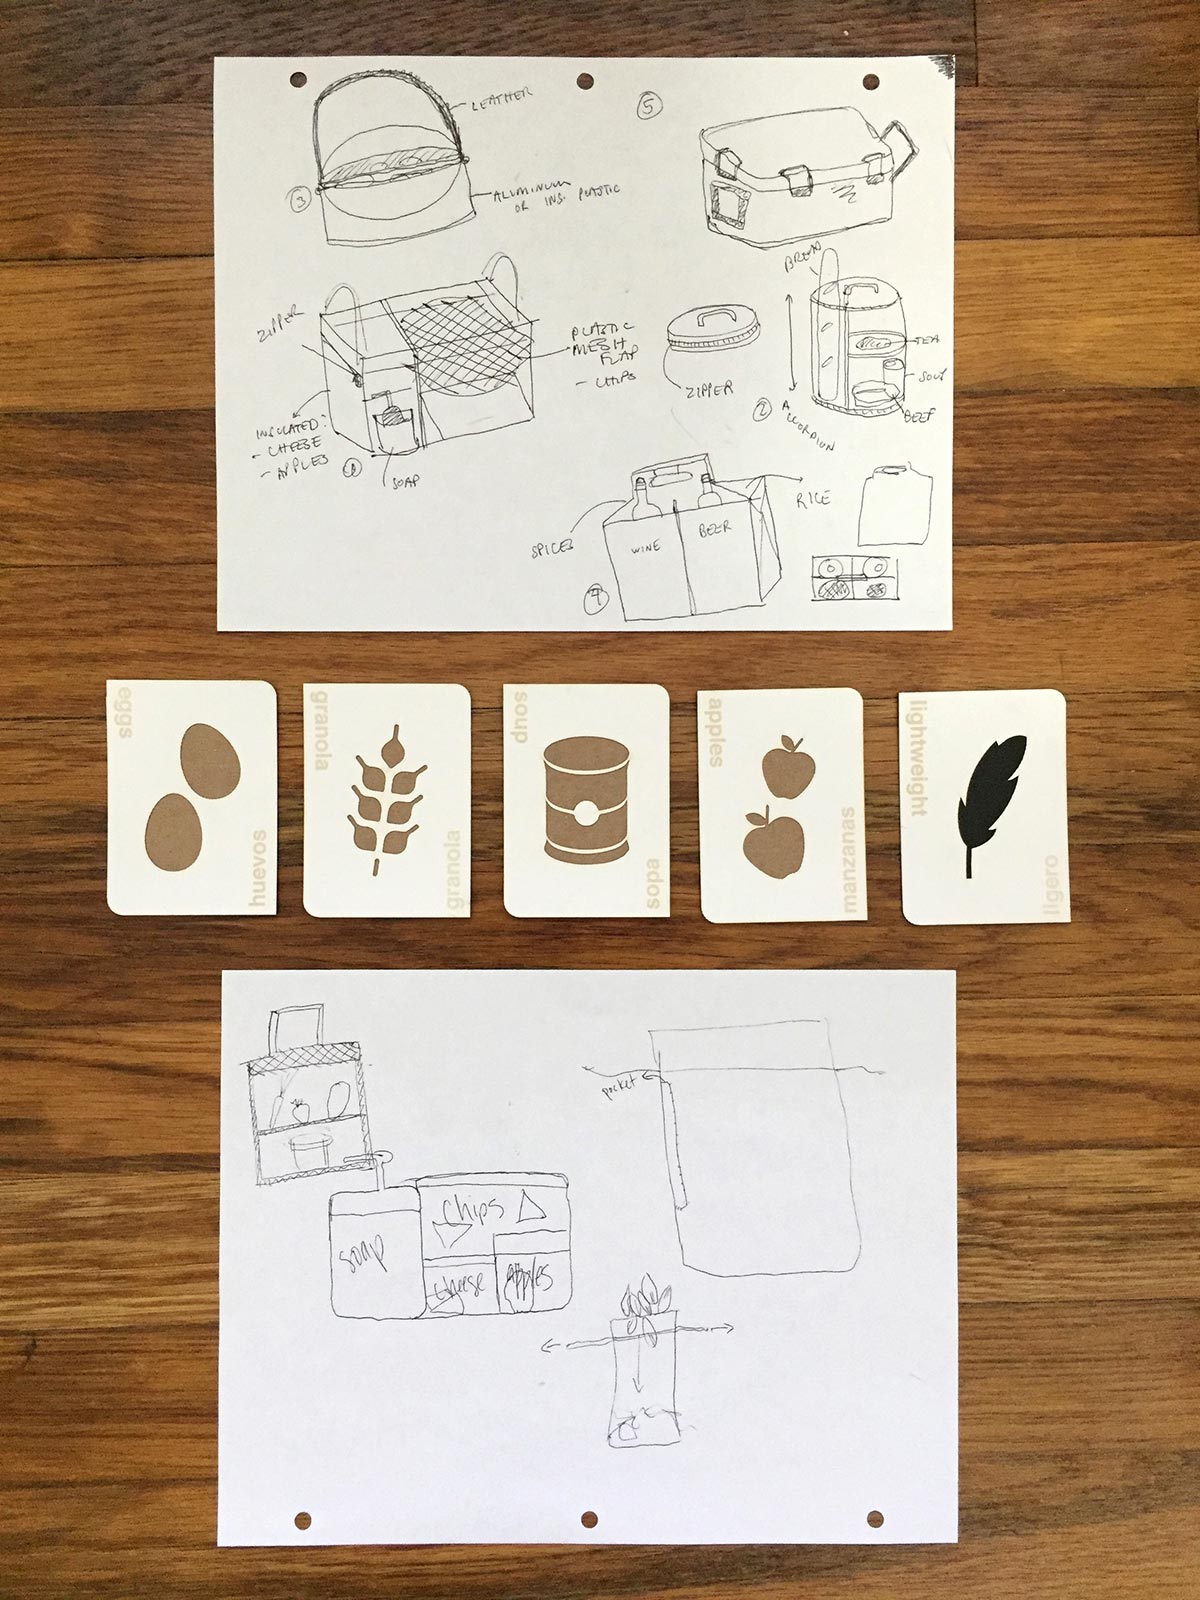 drawings produced by card game